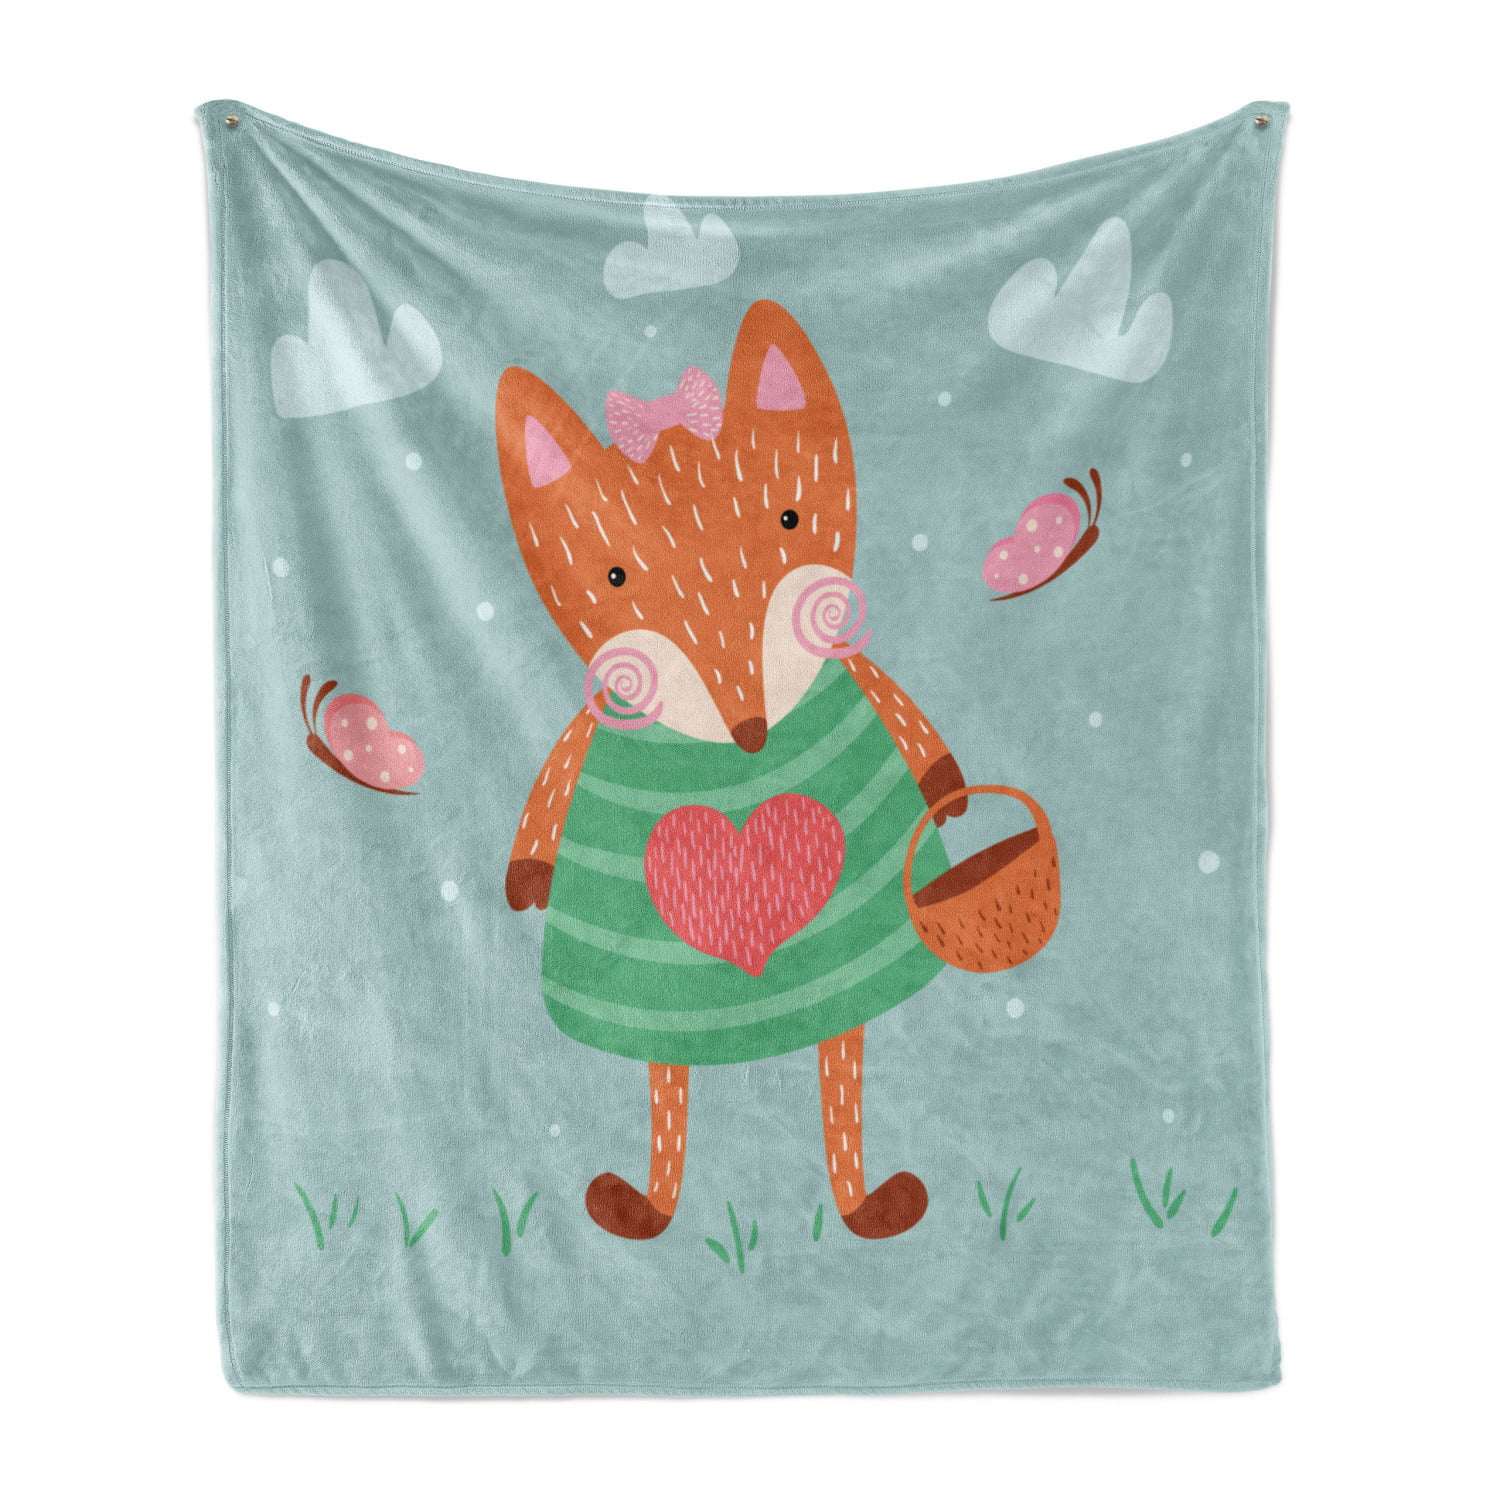 Cozy Plush for Indoor and Outdoor Use Ambesonne Fox Soft Flannel Fleece Throw Blanket Nursery Themed Illustration of Animal with Dress and Bow 50 x 70 Multicolor